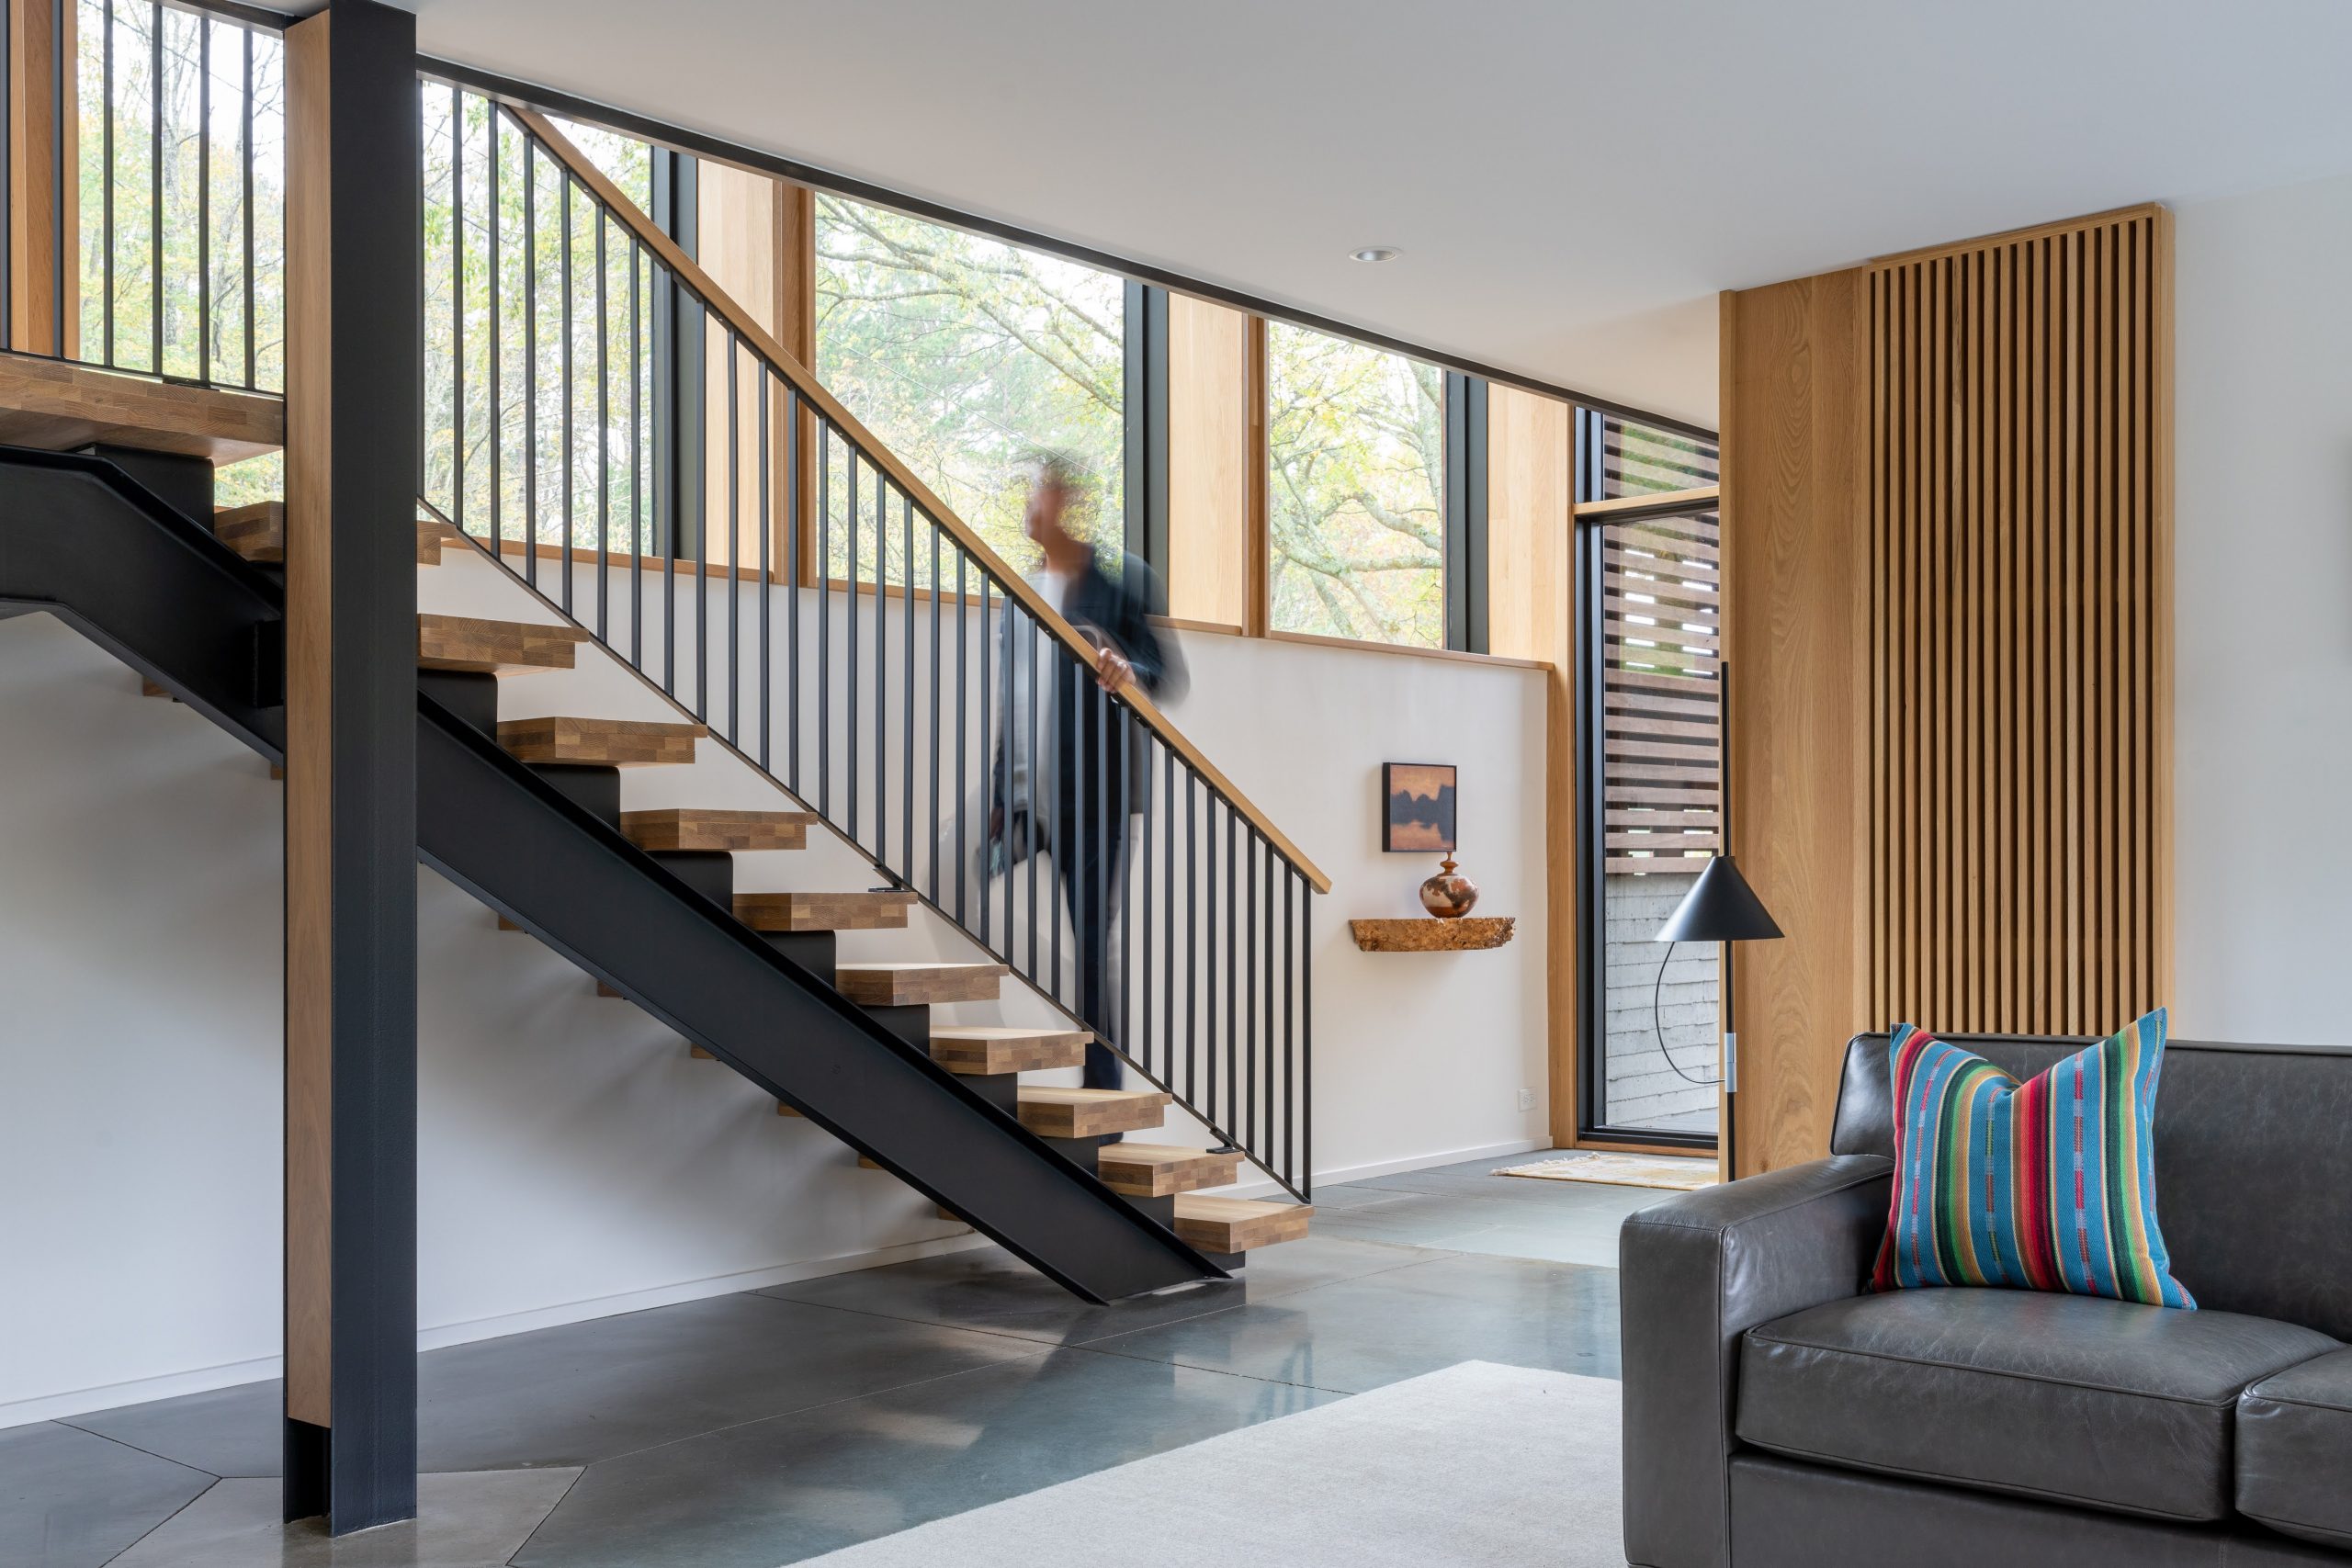 A person walks up the stairs on the side of the living room of the Wood Screen House in Nashville, Tennessee during the day featuring Kebony Modified Wood Clear Cladding on the siding of the back wall and the edge of a gray couch in the foreground on the right